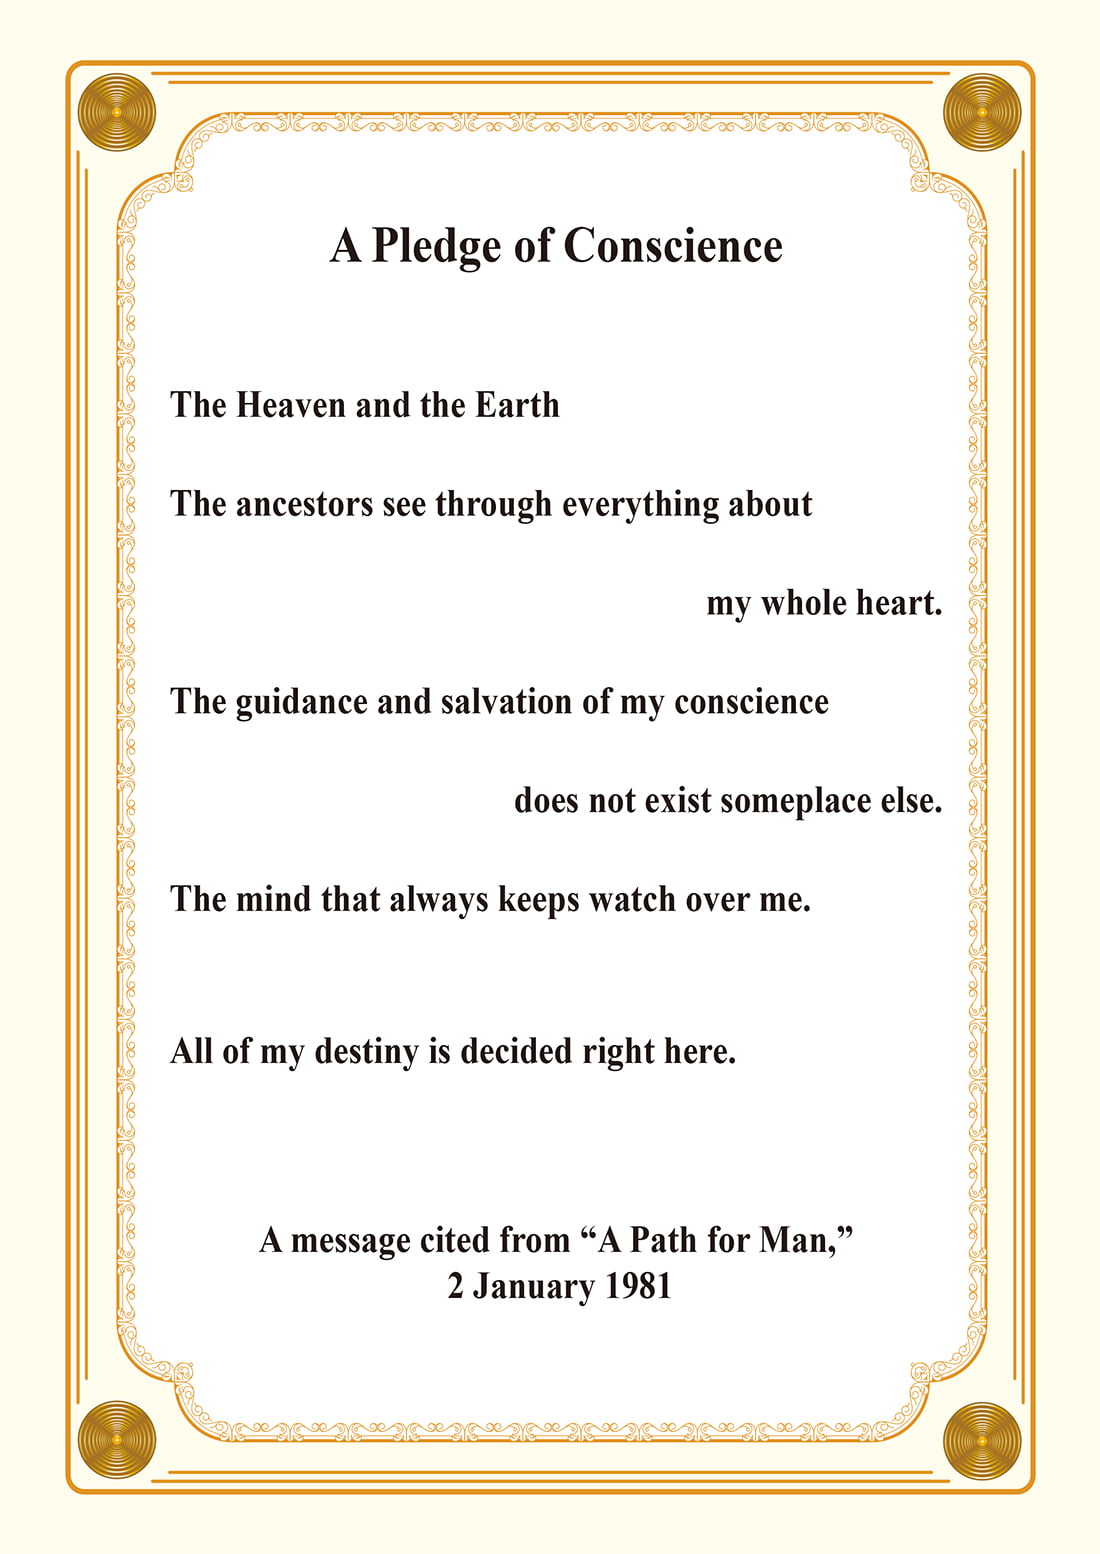 A Pledge of Conscience